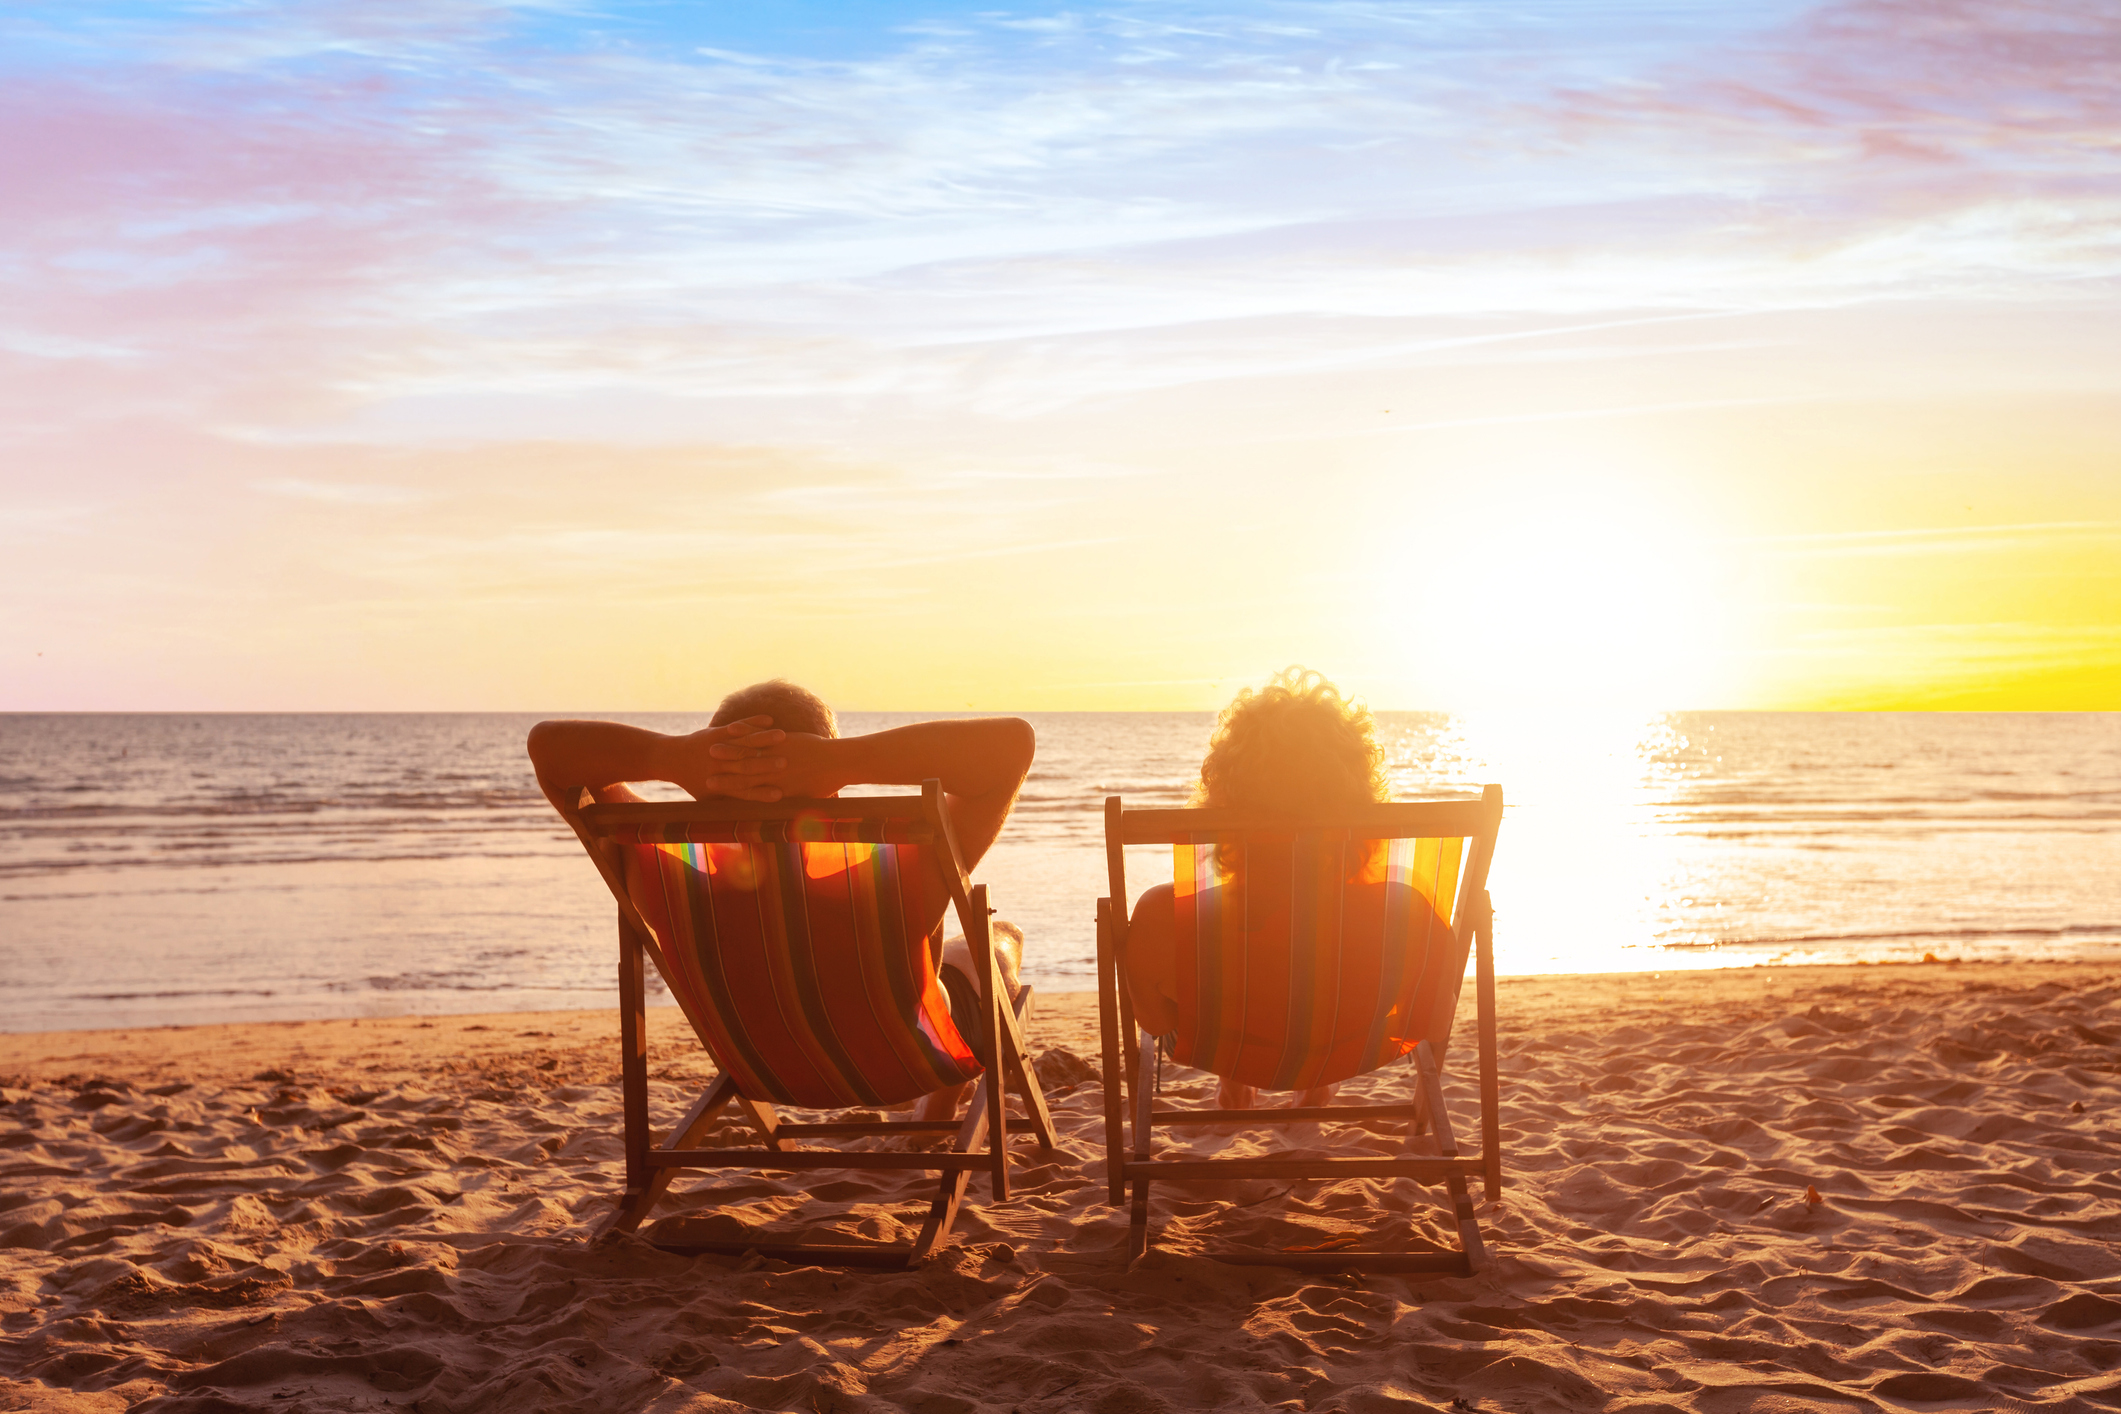 So, you’re thinking of retiring abroad?